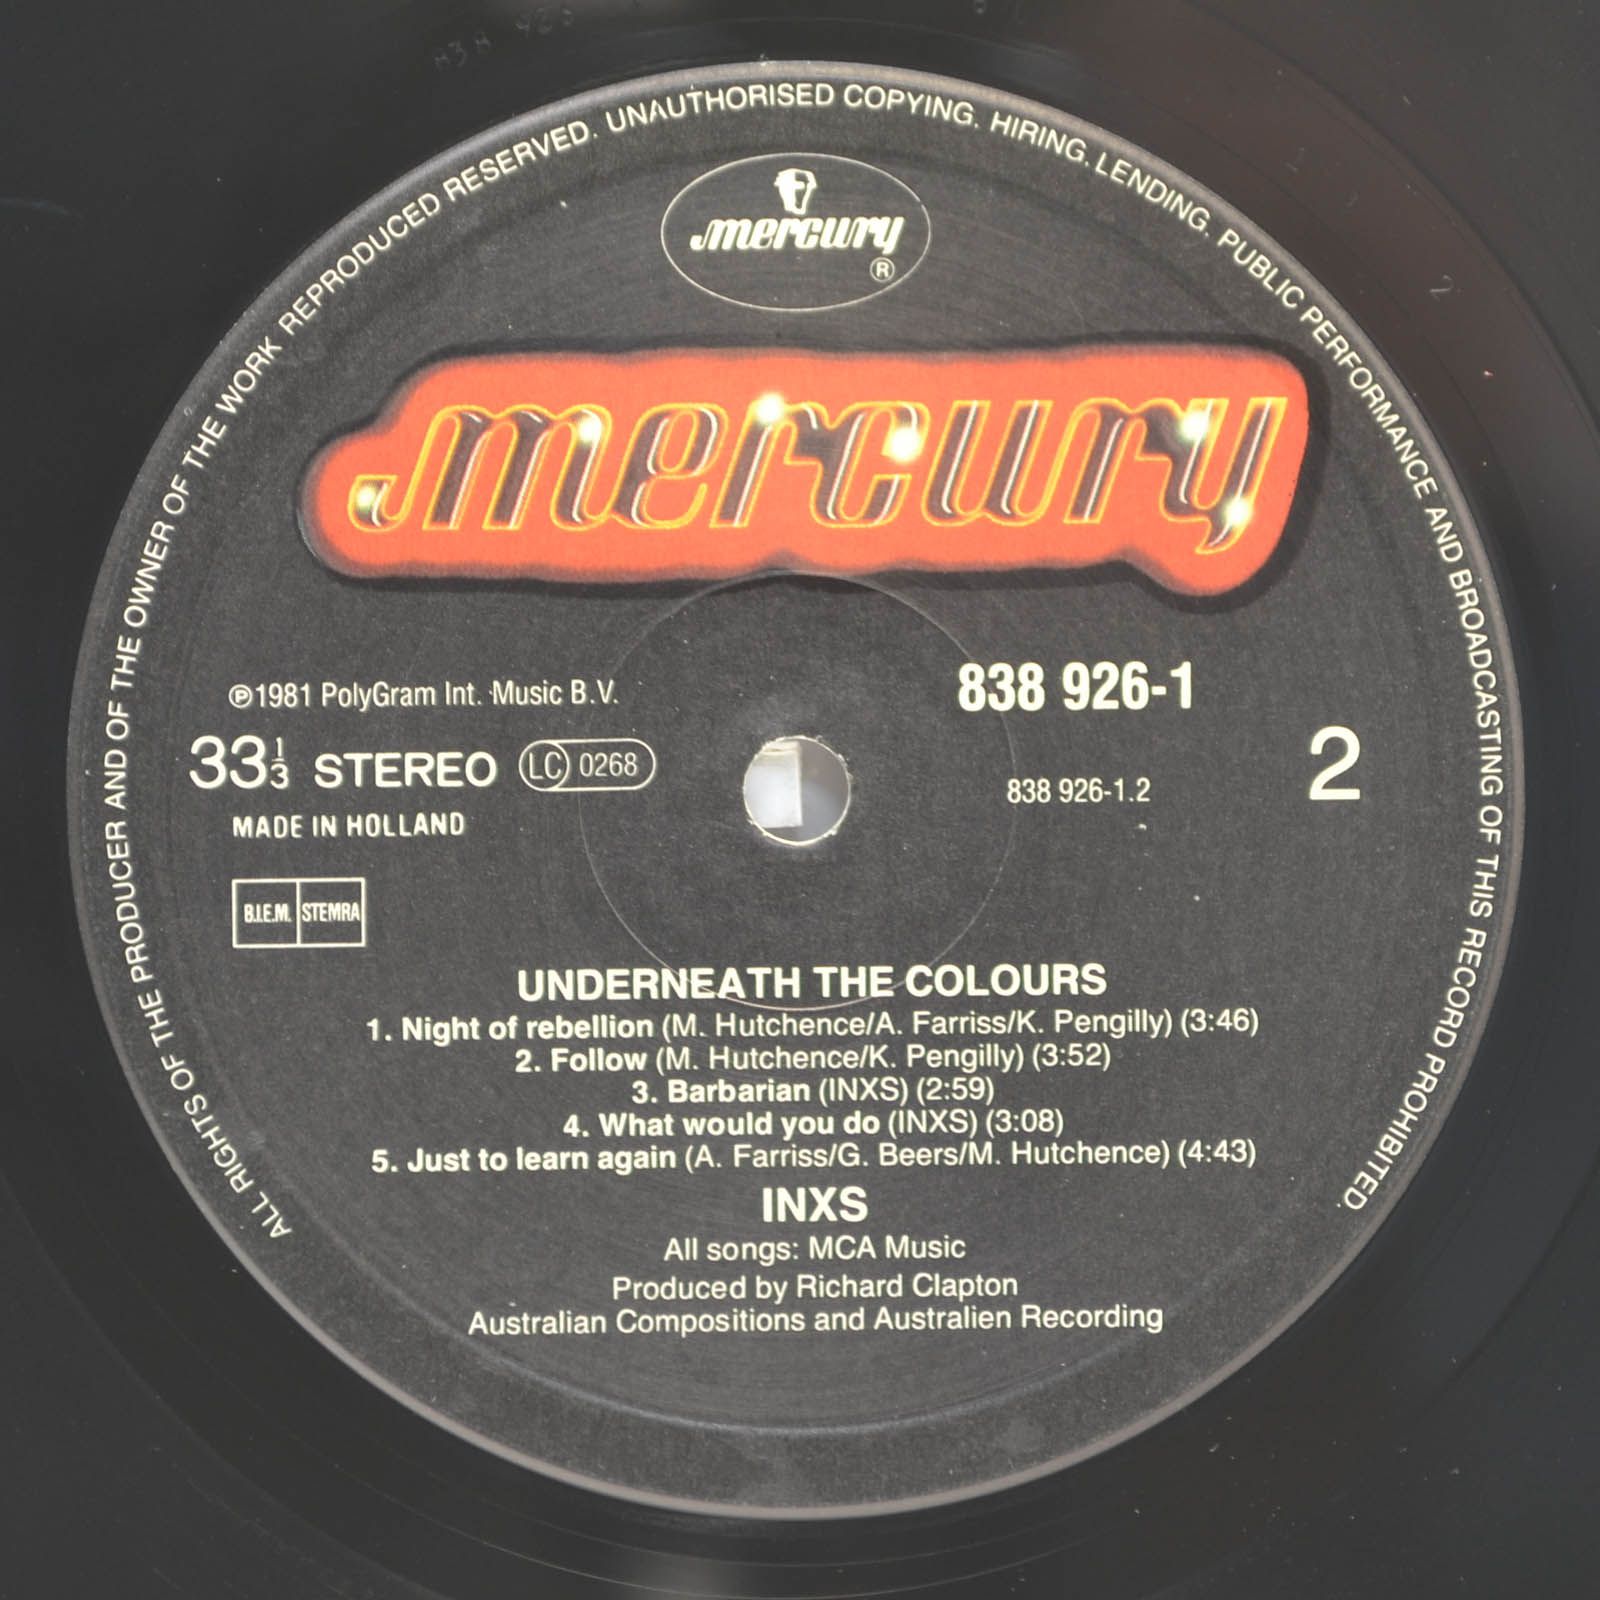 INXS — Underneath The Colours, 1981